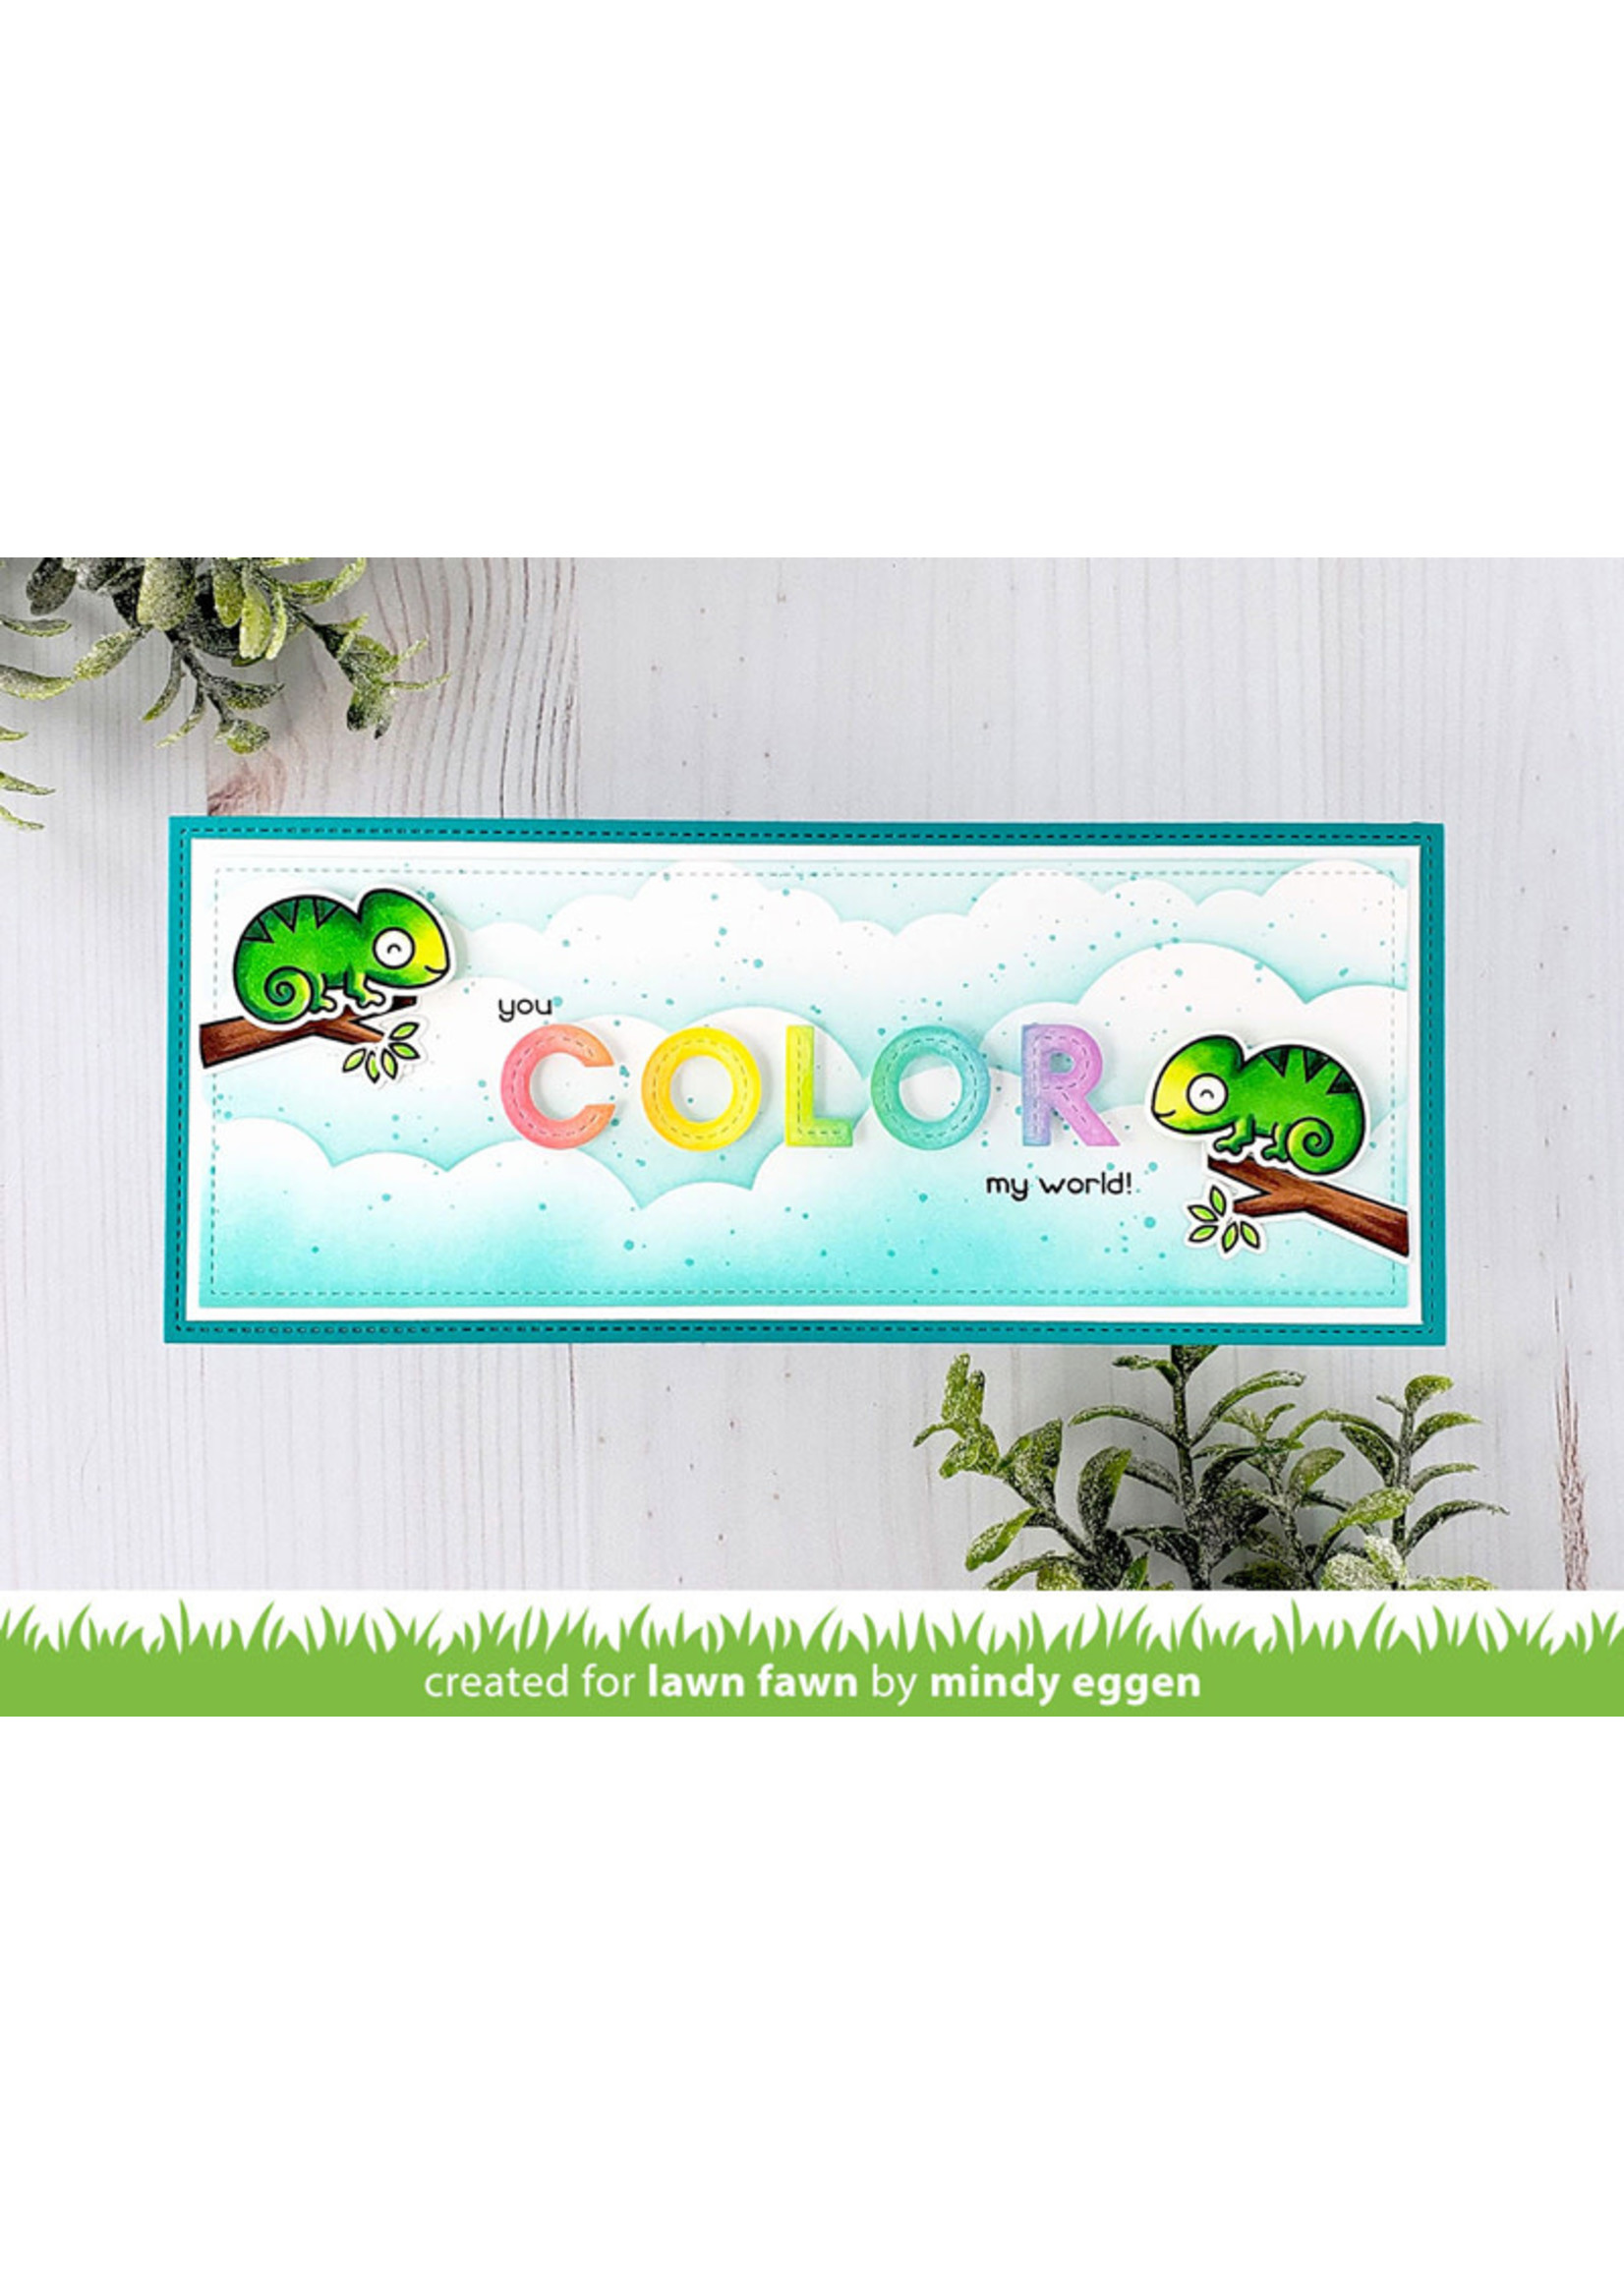 Lawn Fawn one in a chameleon flip-flop stamp